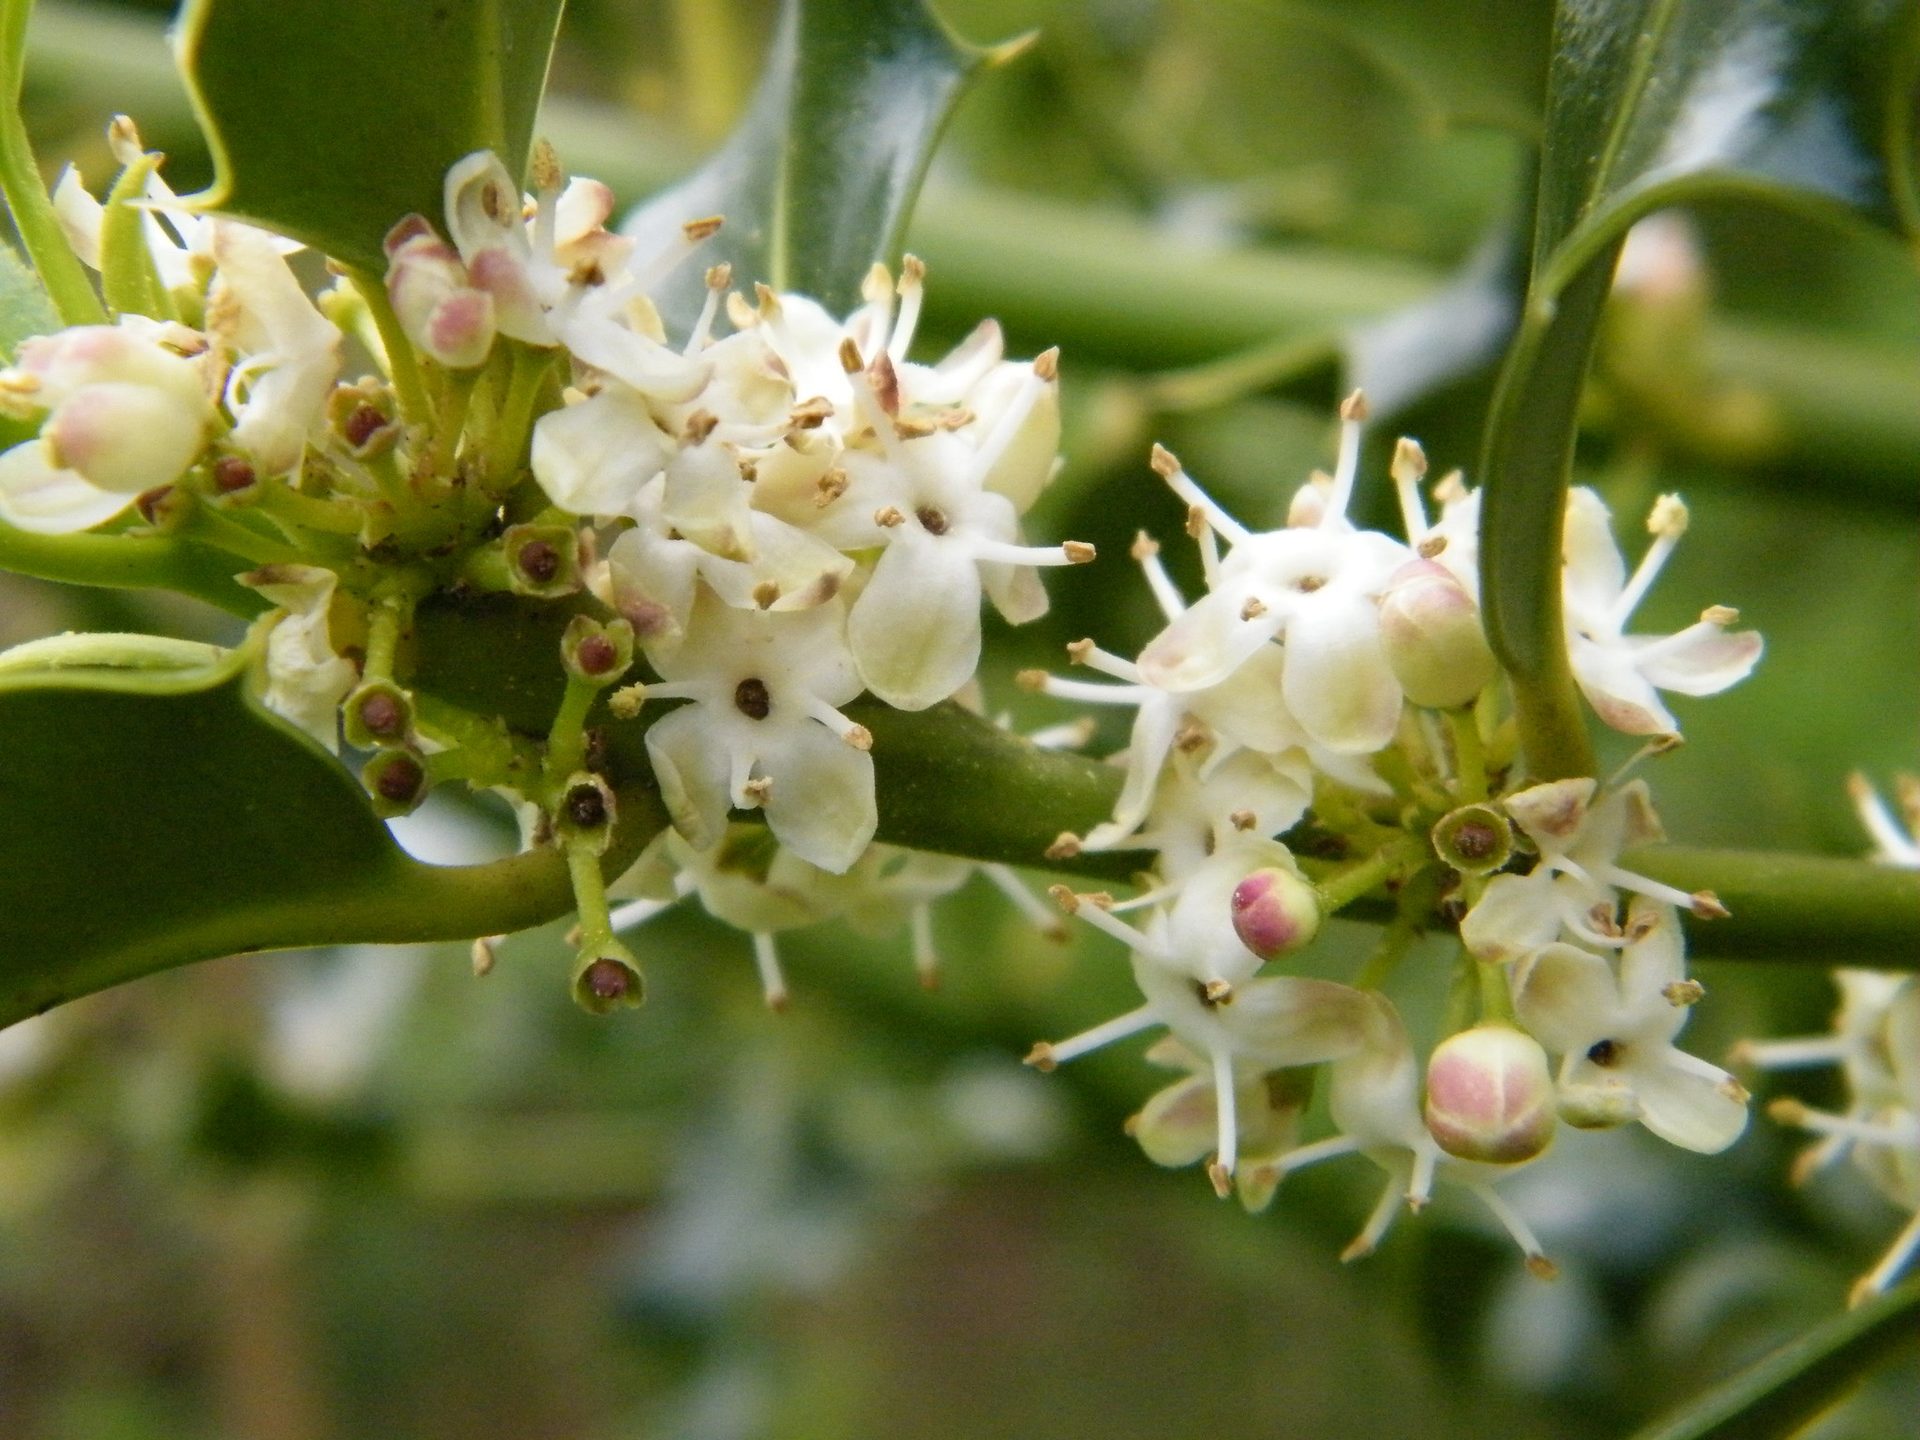 Male Holly flowers